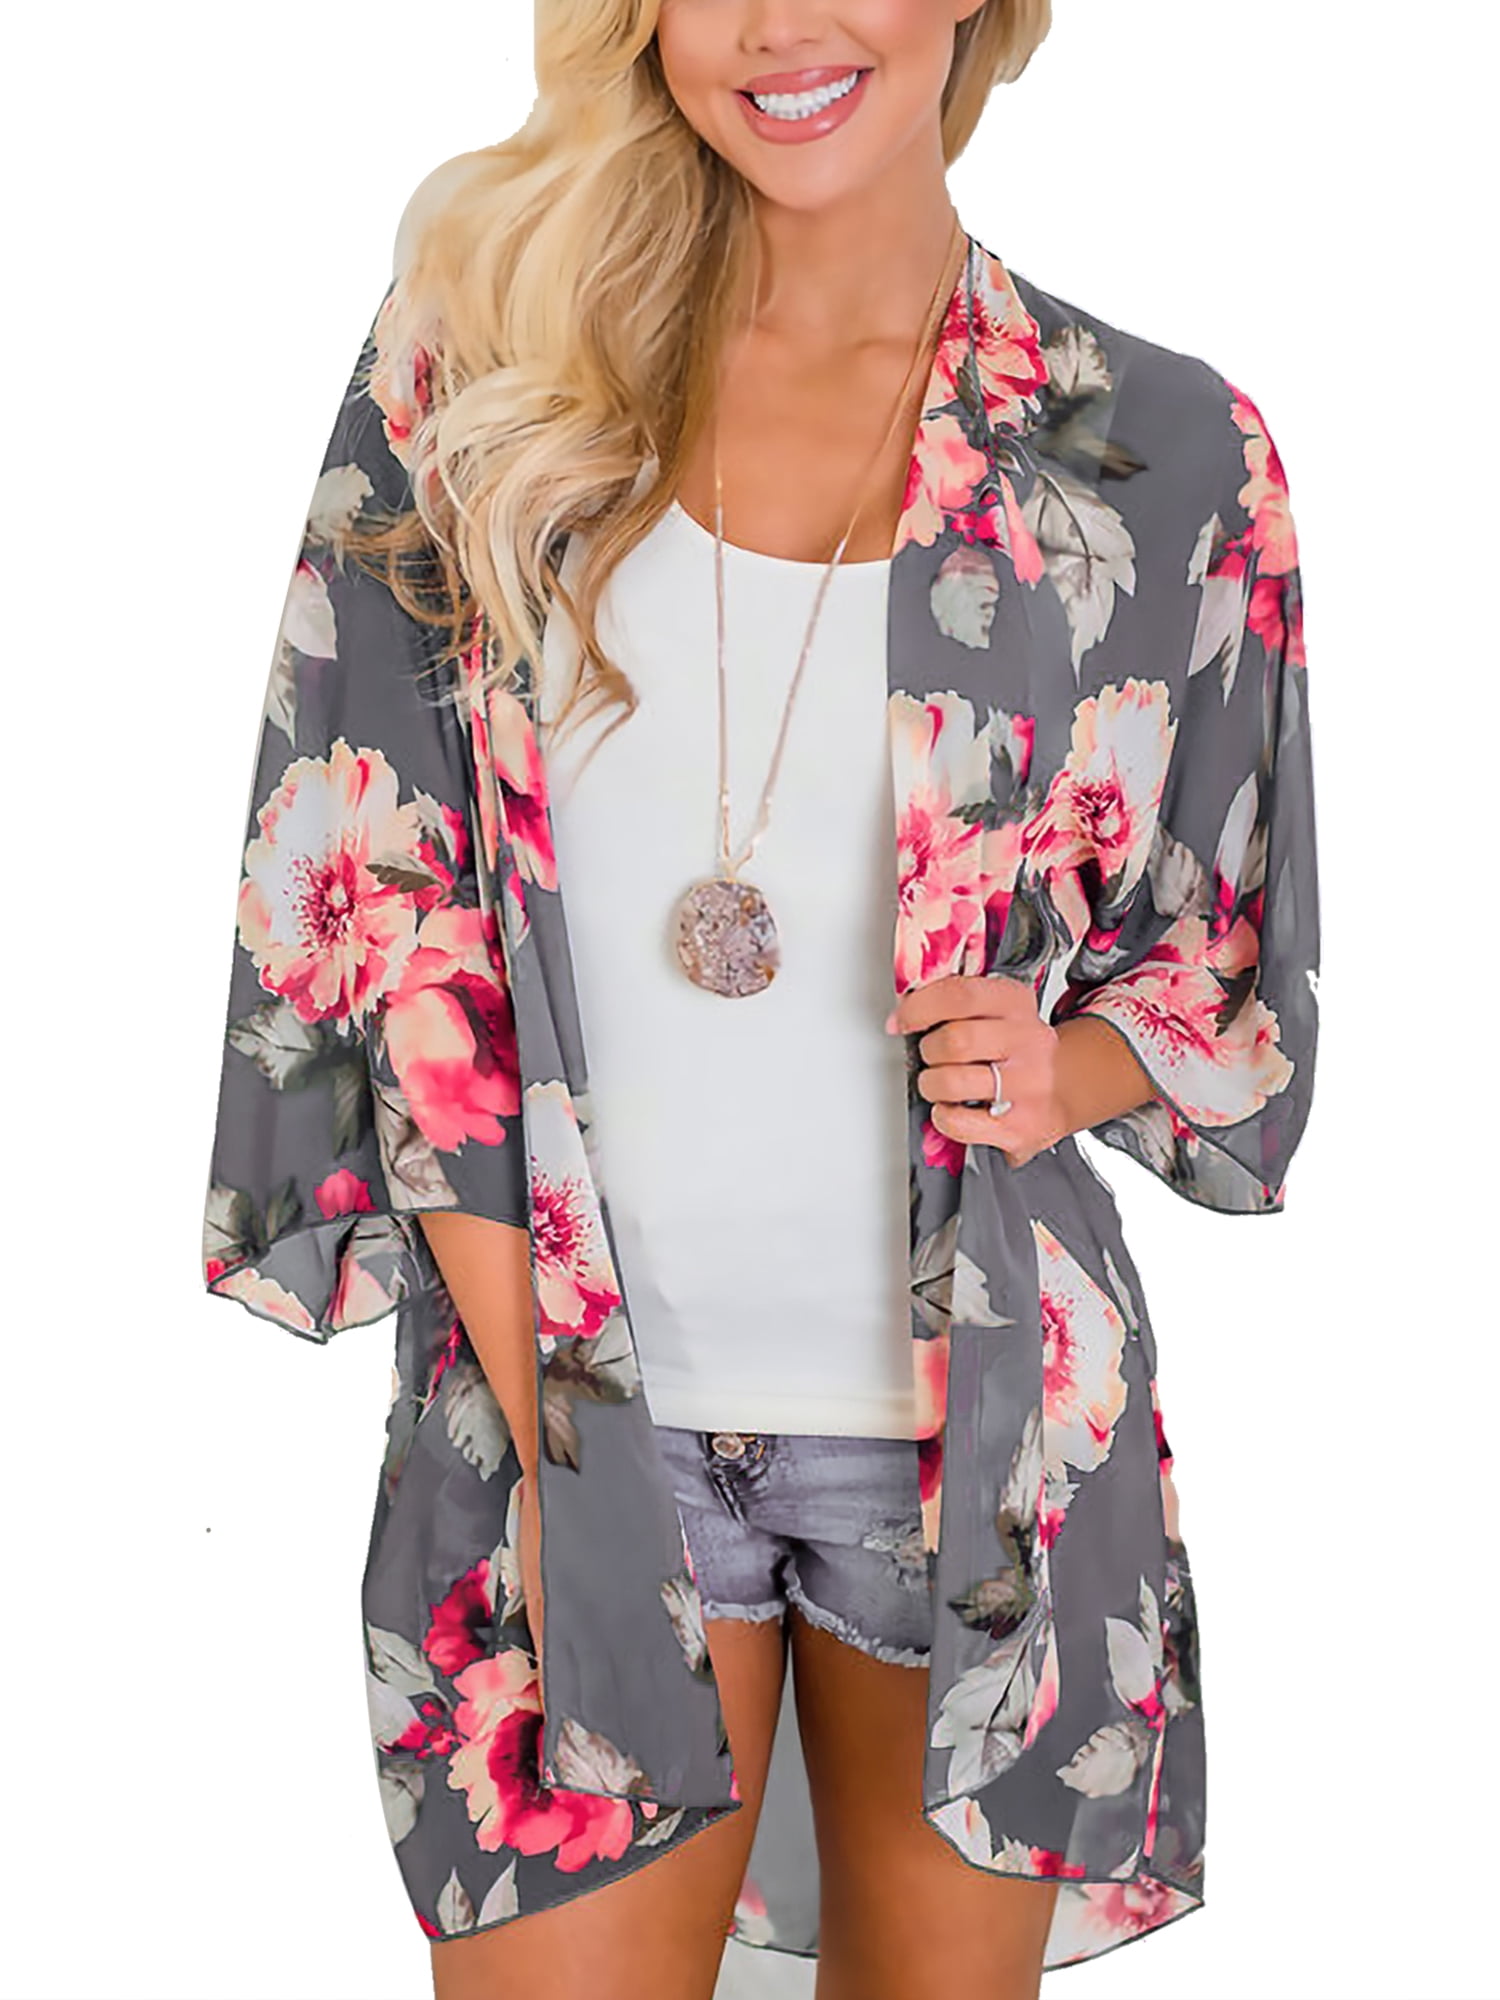 Girls Long Sleeve Cardigan Lightweight Floral Kimono Cover Ups Coat Elbow Patch Tops with Pockets 